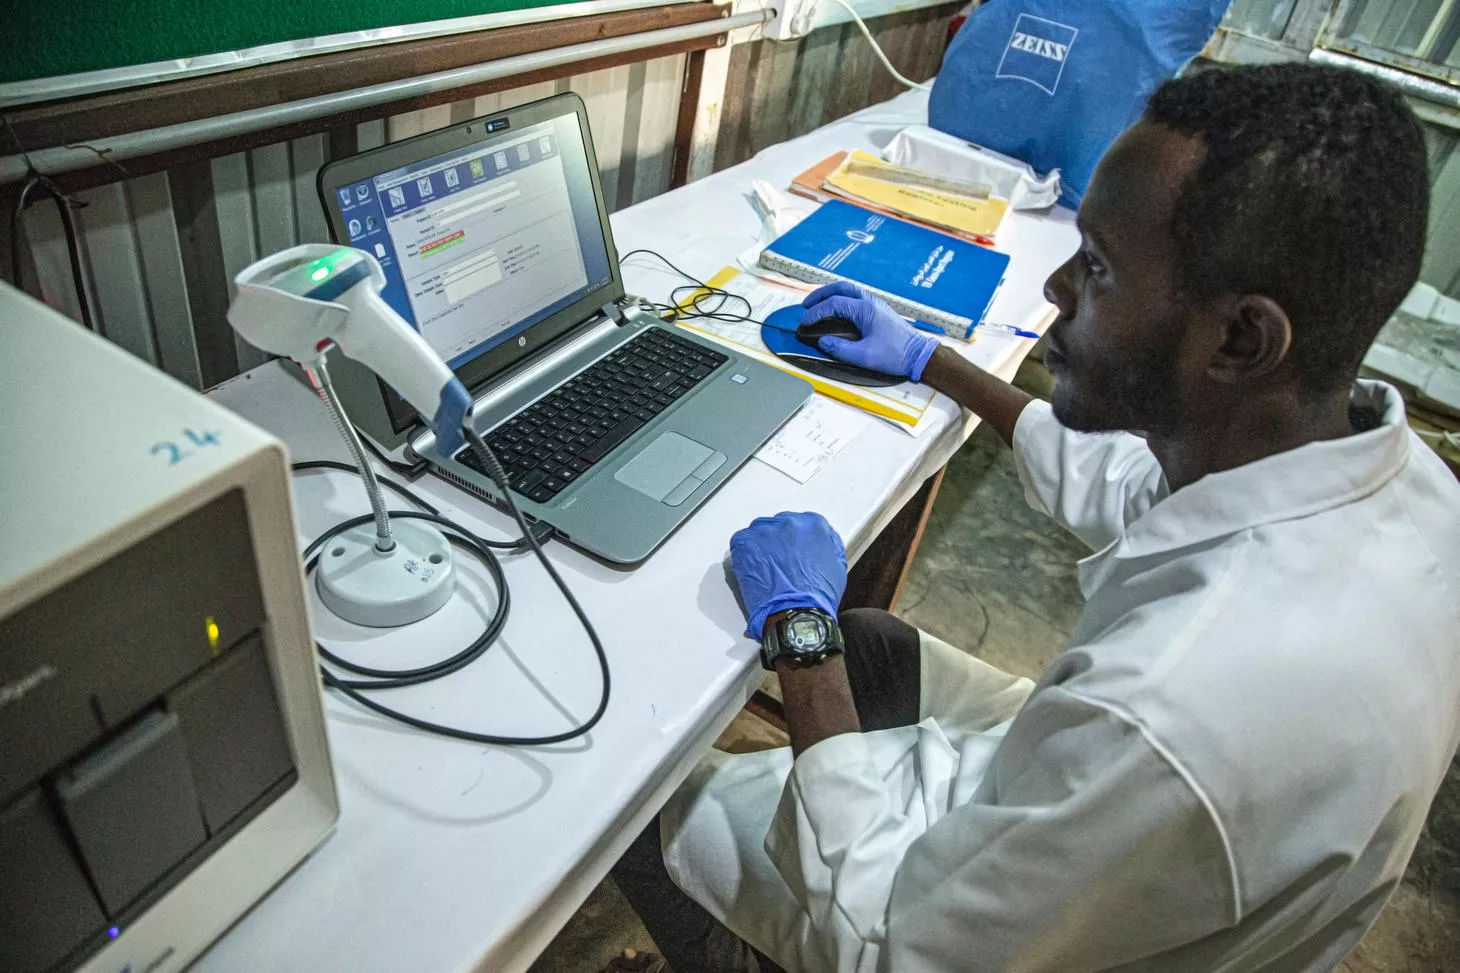 Muhanned Elnour, laboratory supervisor at MSF’s hospital in Al Kashafa refugee camp, in Sudan’s White Nile state, analyses data on the computer.